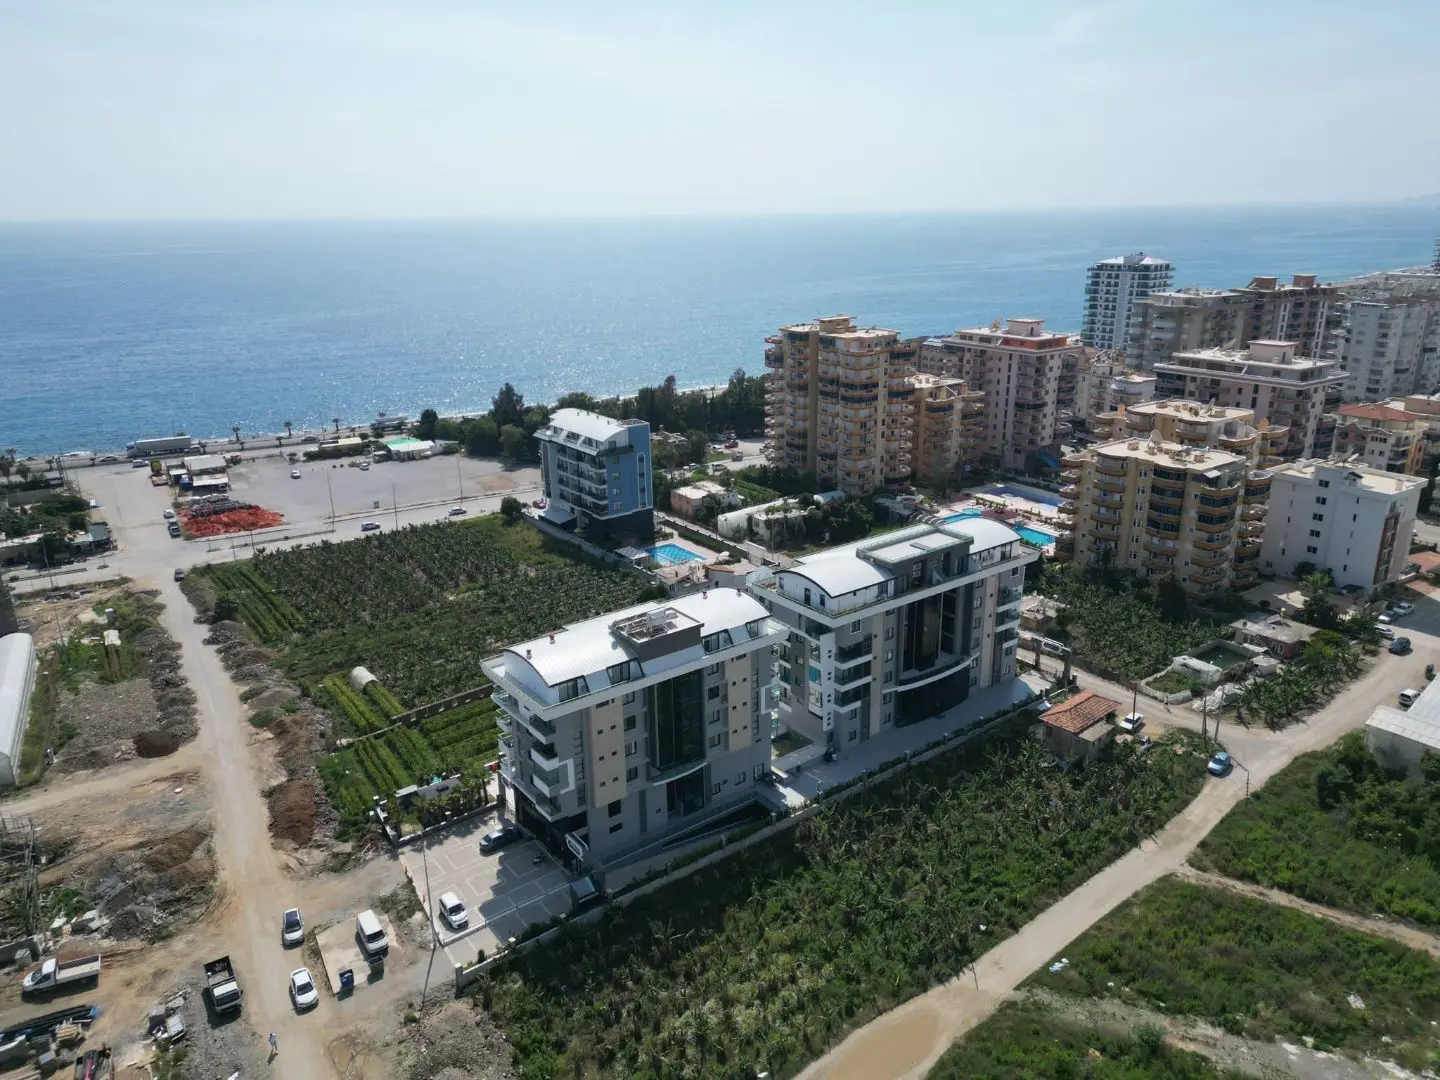 2 BEDROOM APARTMENT IN KARGICAK WITH FULL SEA AND NATURE VIEW